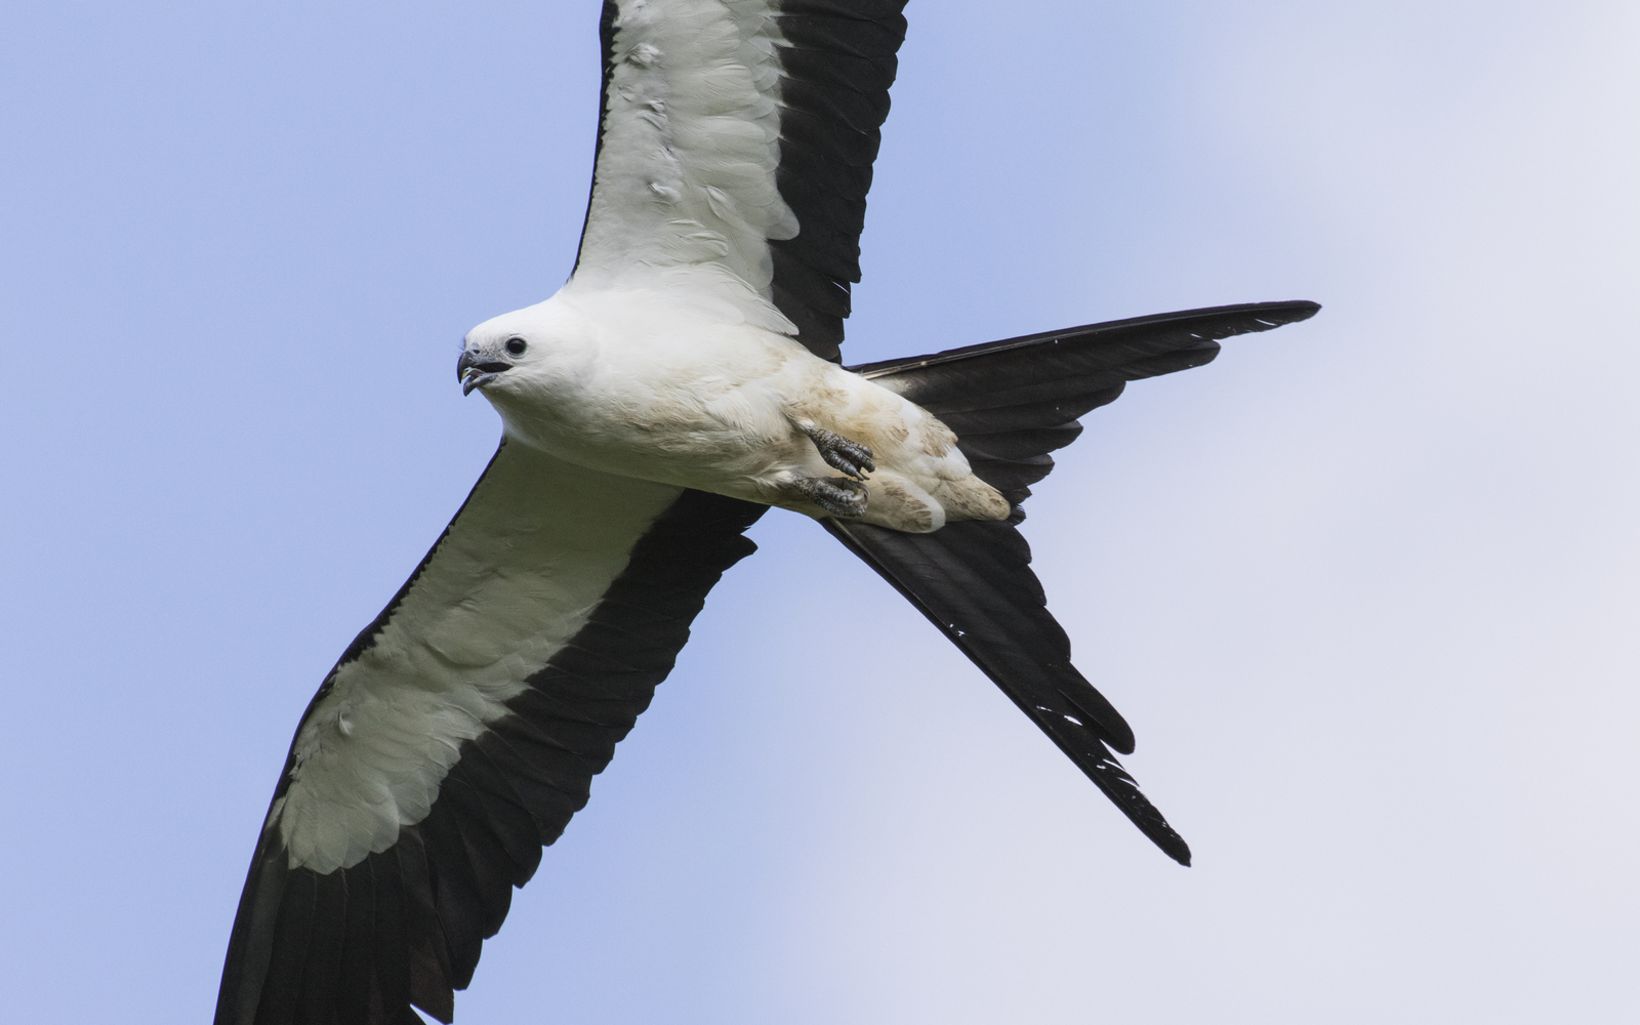 Swallow tailed kites (Elanoides forficatus) often flock to agricultural fields to feed on insects before their migration. 